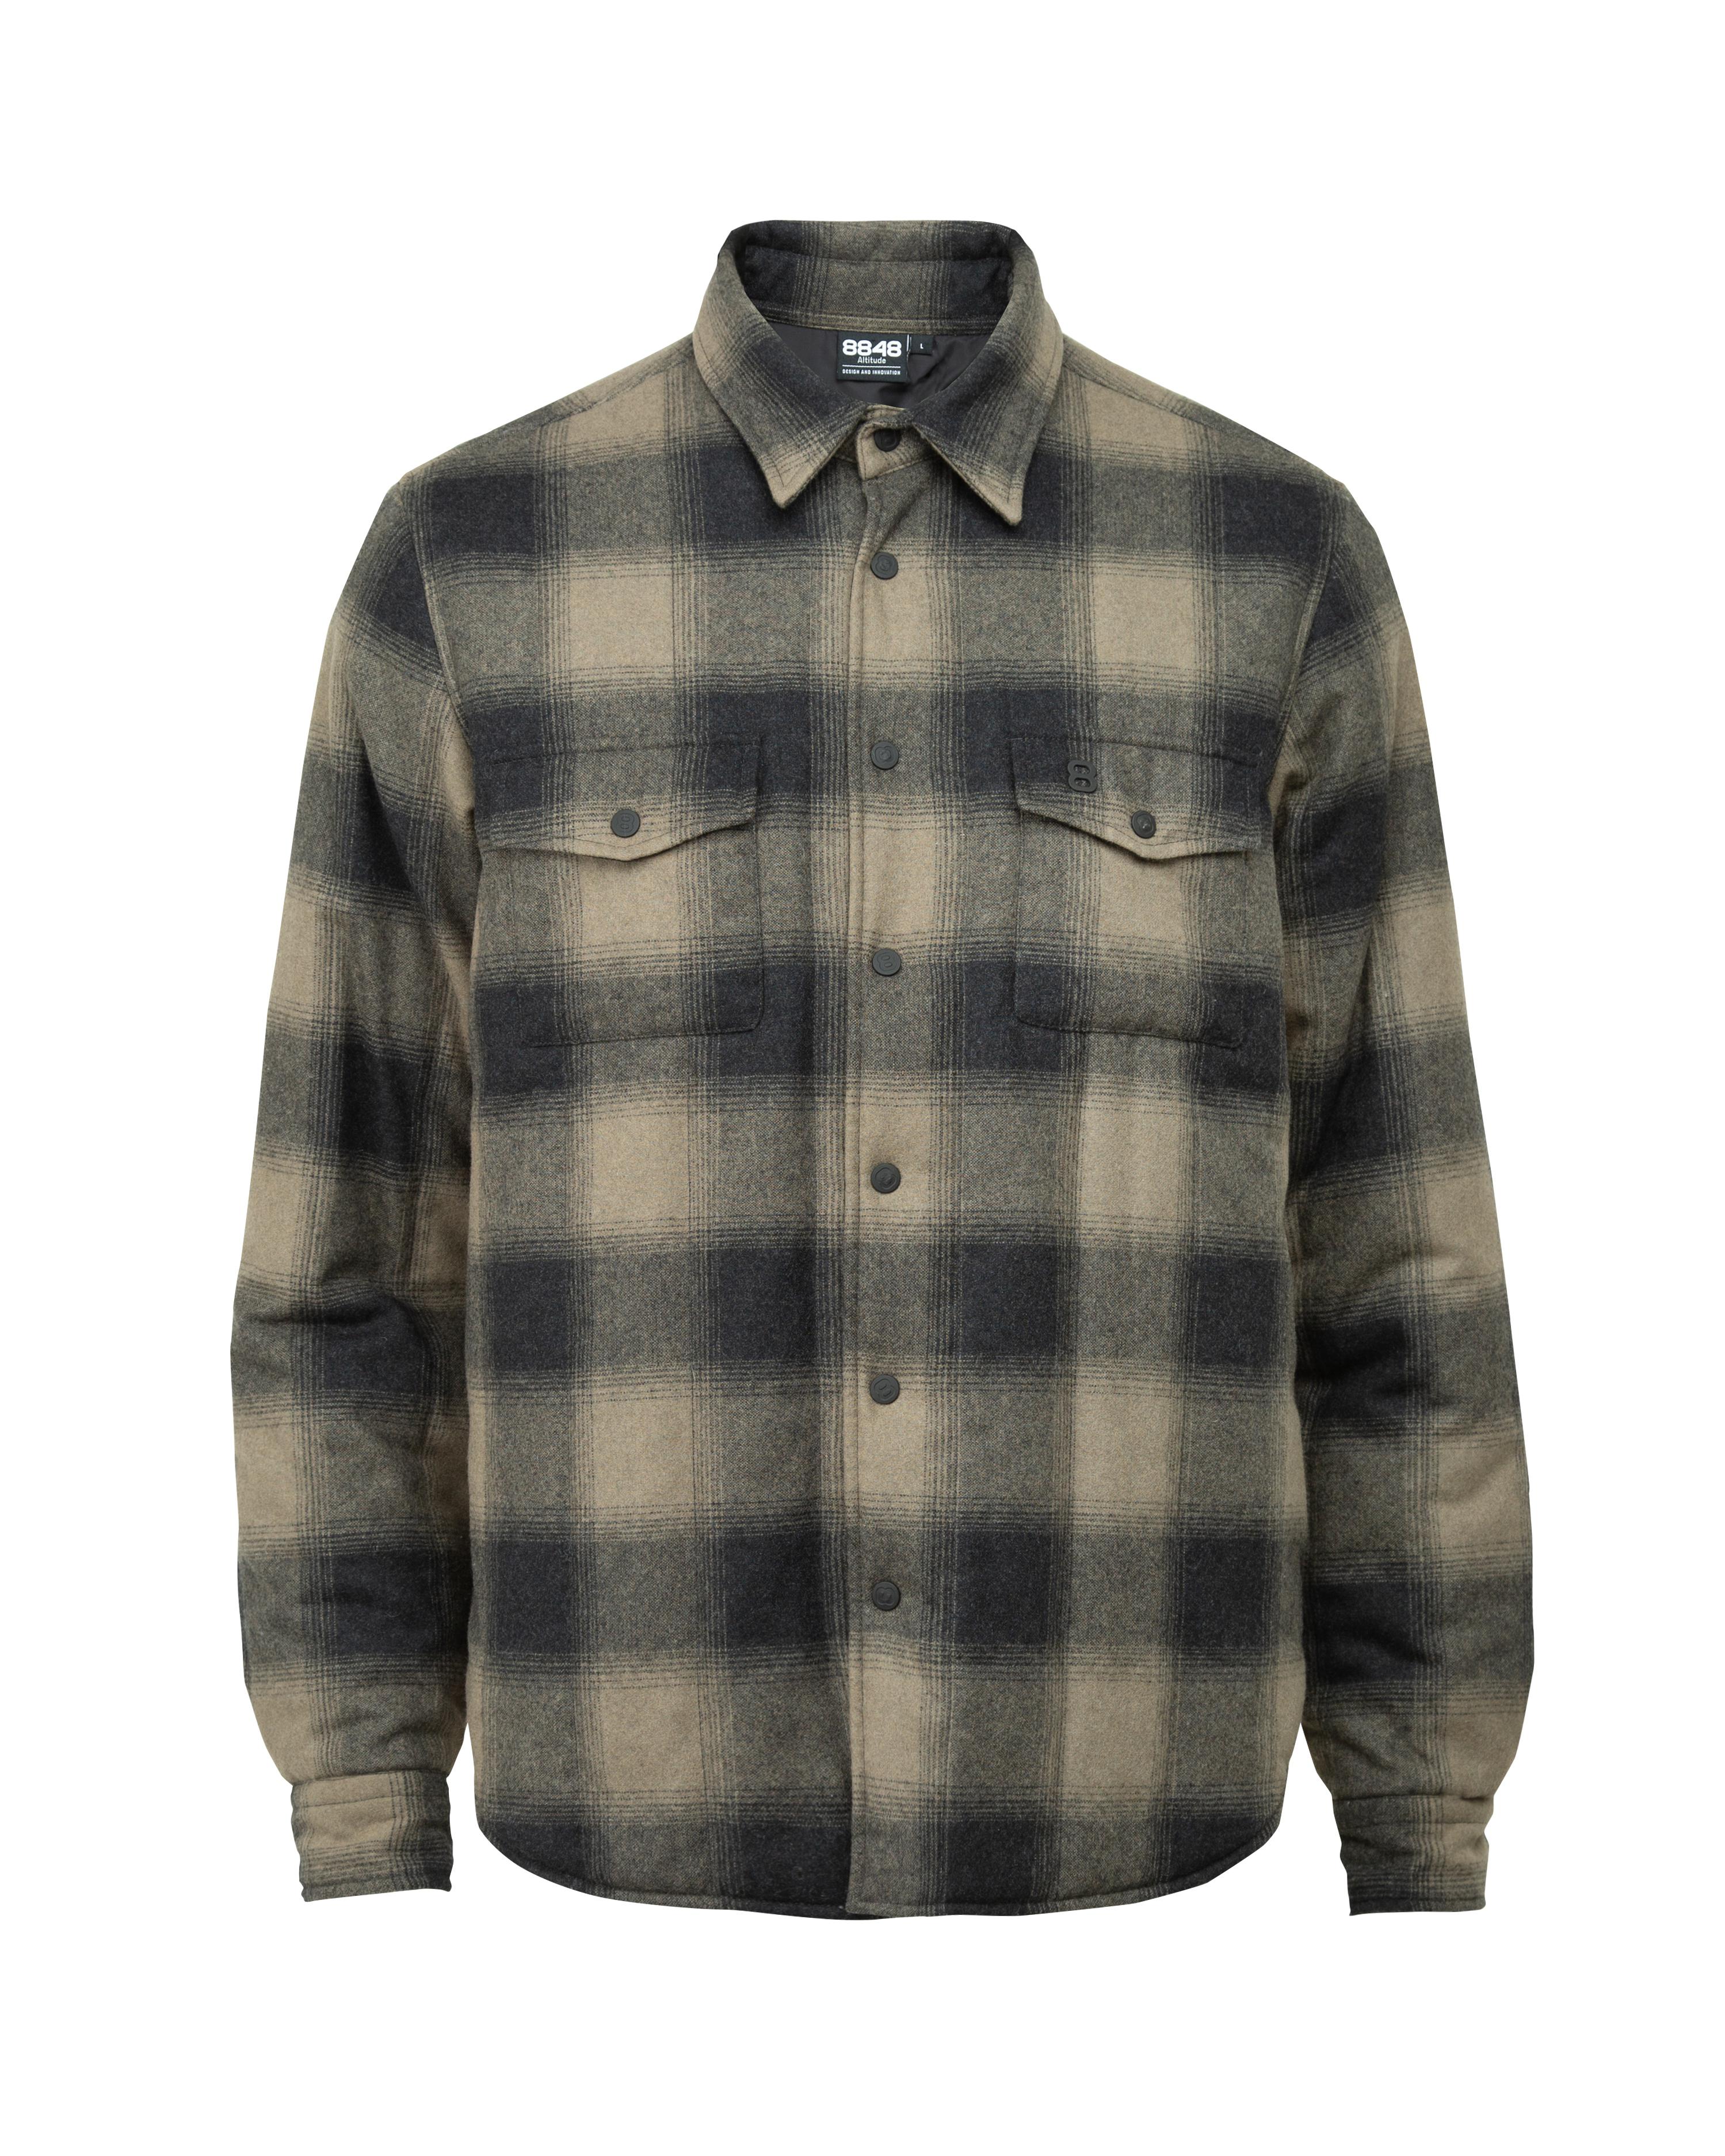 BWS-04 SCOUT OVERSHIRT 9.5 oz. grey ombre check flannel